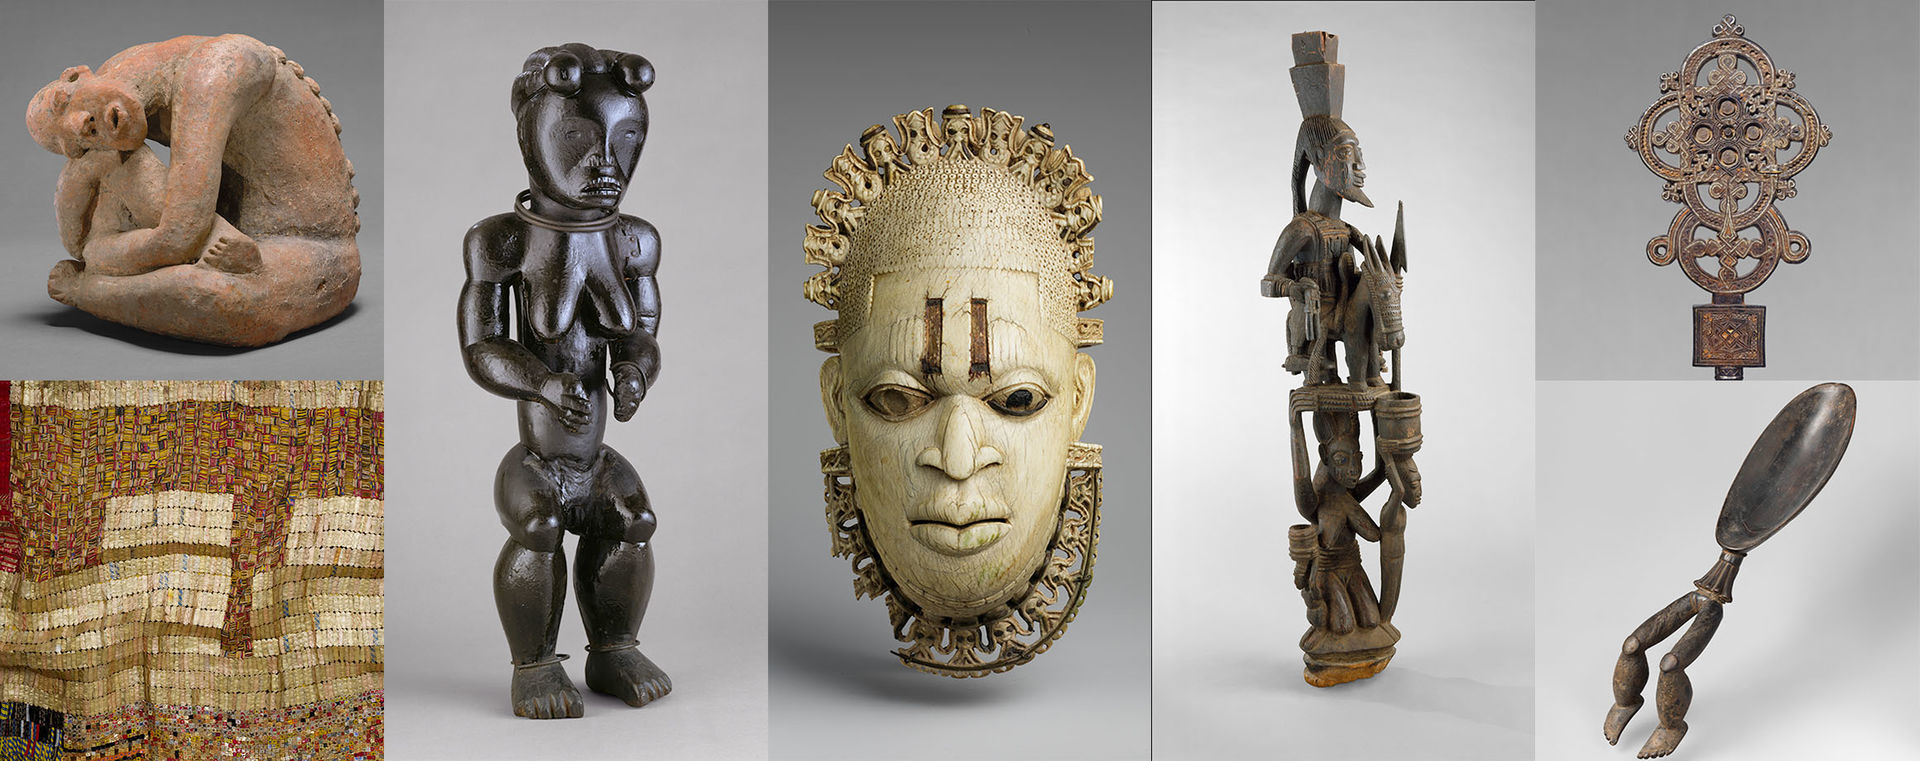 Photography from the main African gallery at The Met